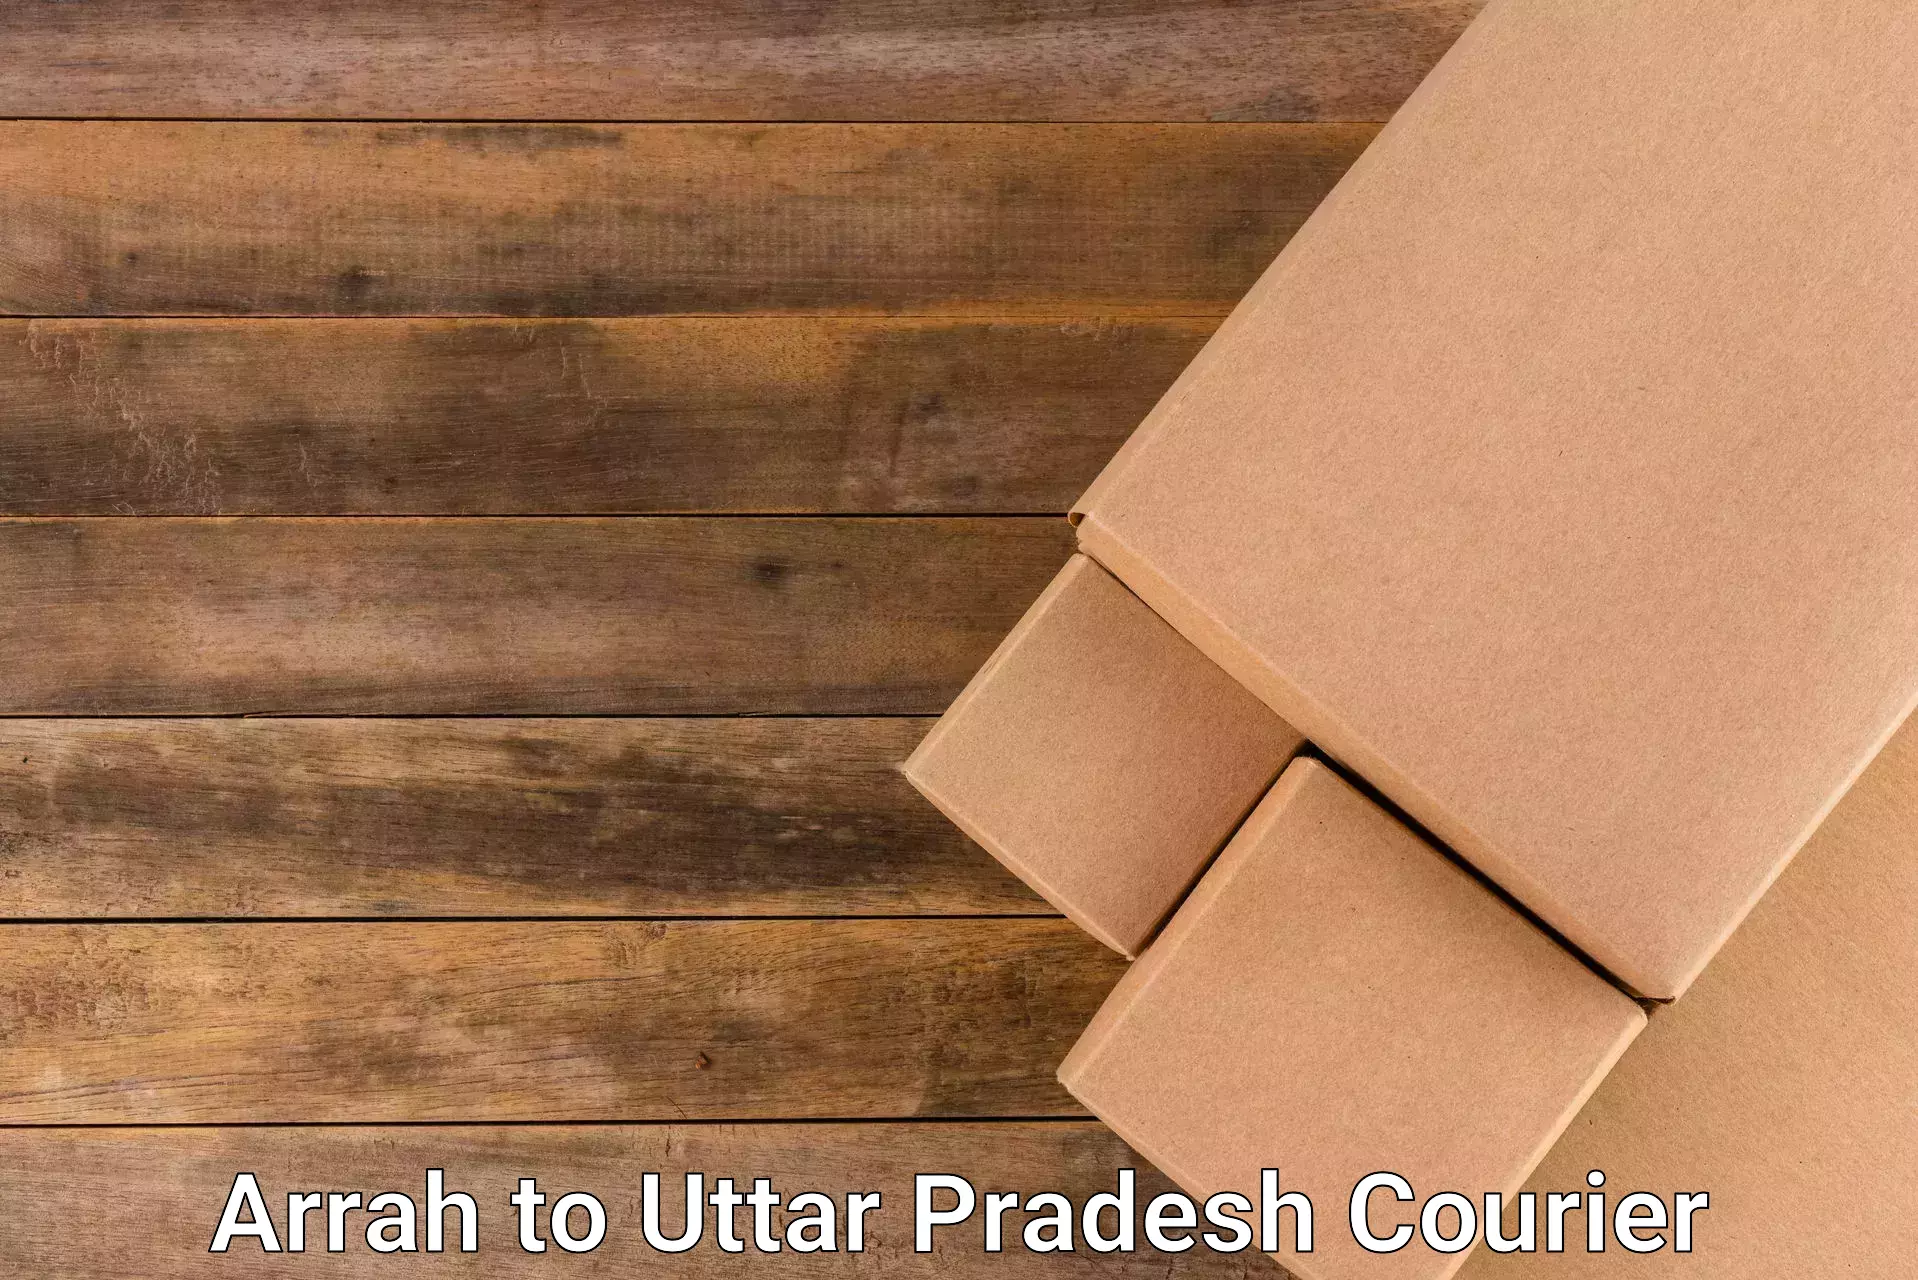 Courier service partnerships Arrah to Allahabad